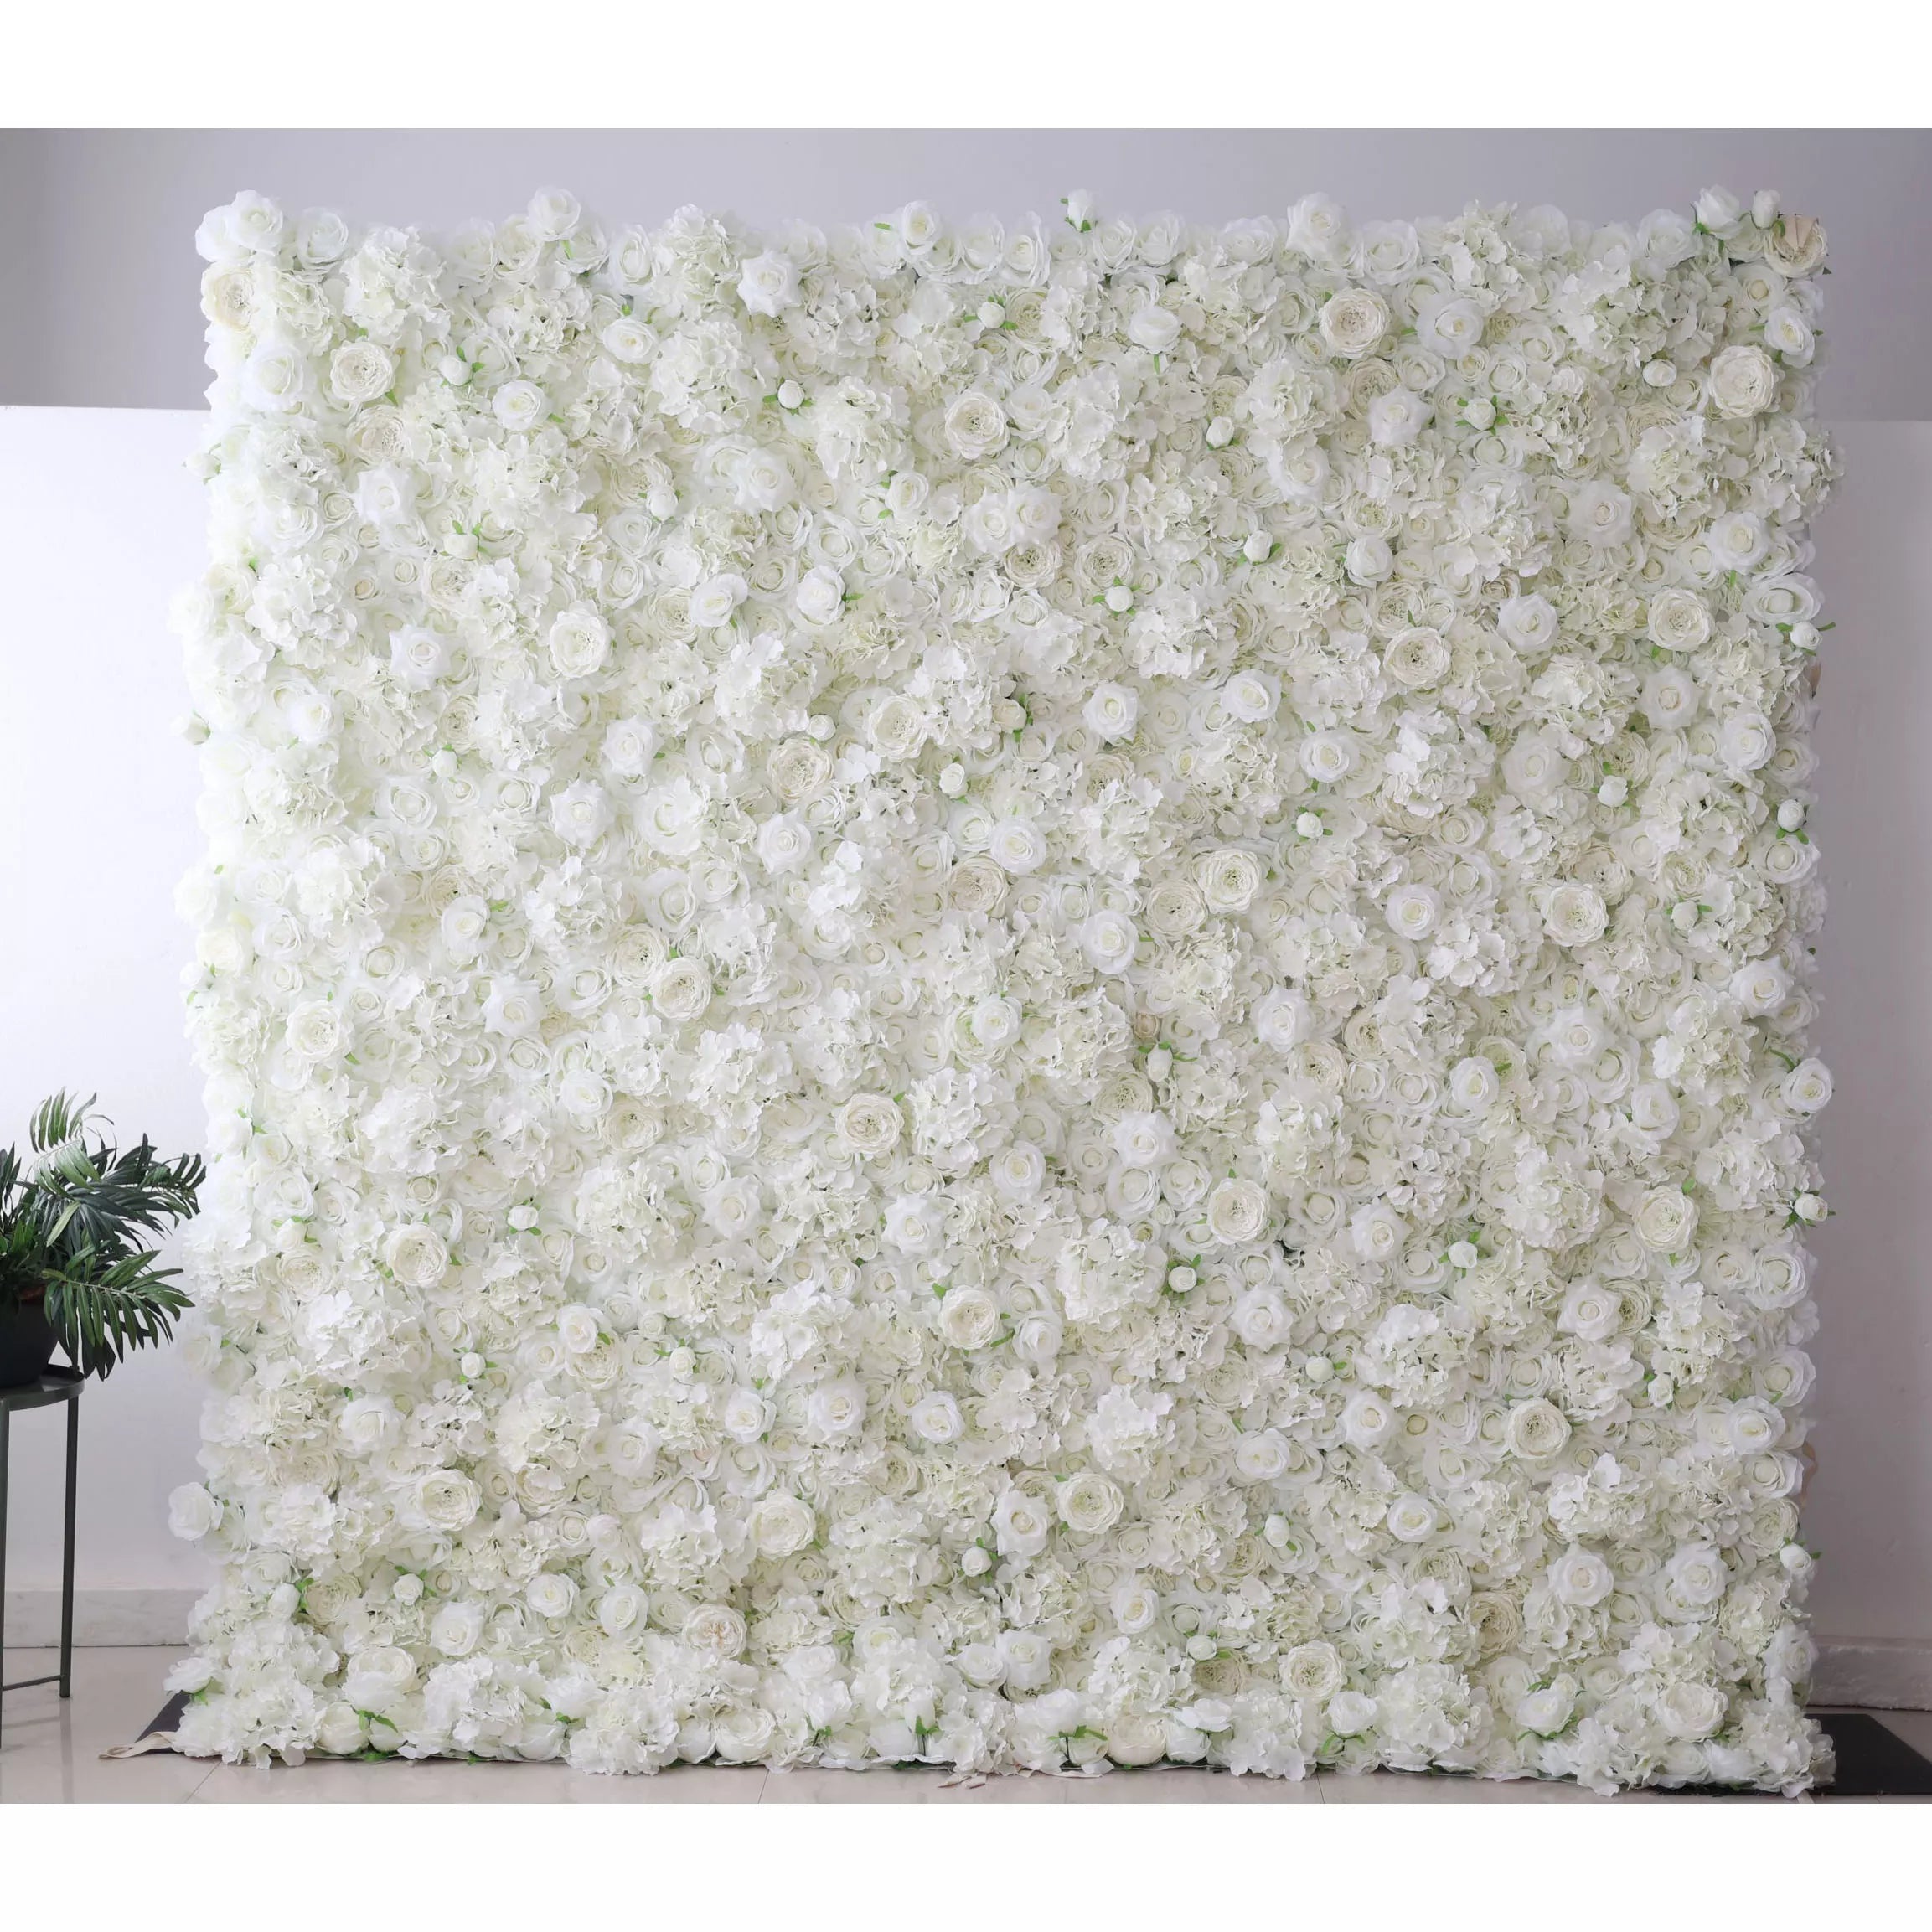 Valar Flowers' Artificial Fabric Flower Wall: Ethereal White Elegance. Immerse in an ocean of pure white blossoms; a luxurious arrangement that epitomizes classic beauty and sophistication, perfect for events desiring grace and angelic radiance.